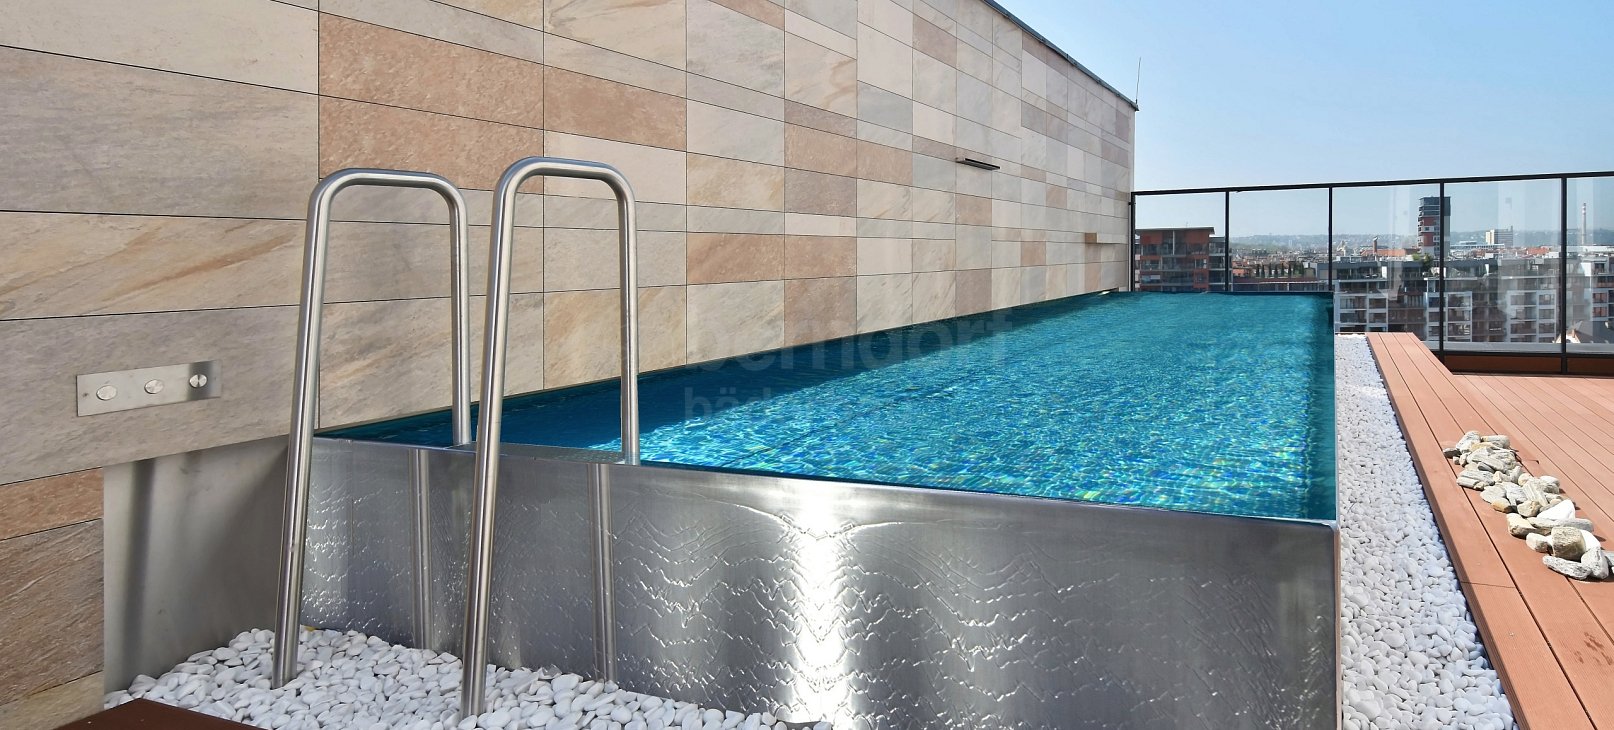 Roof privat pool with infinity overflow 5